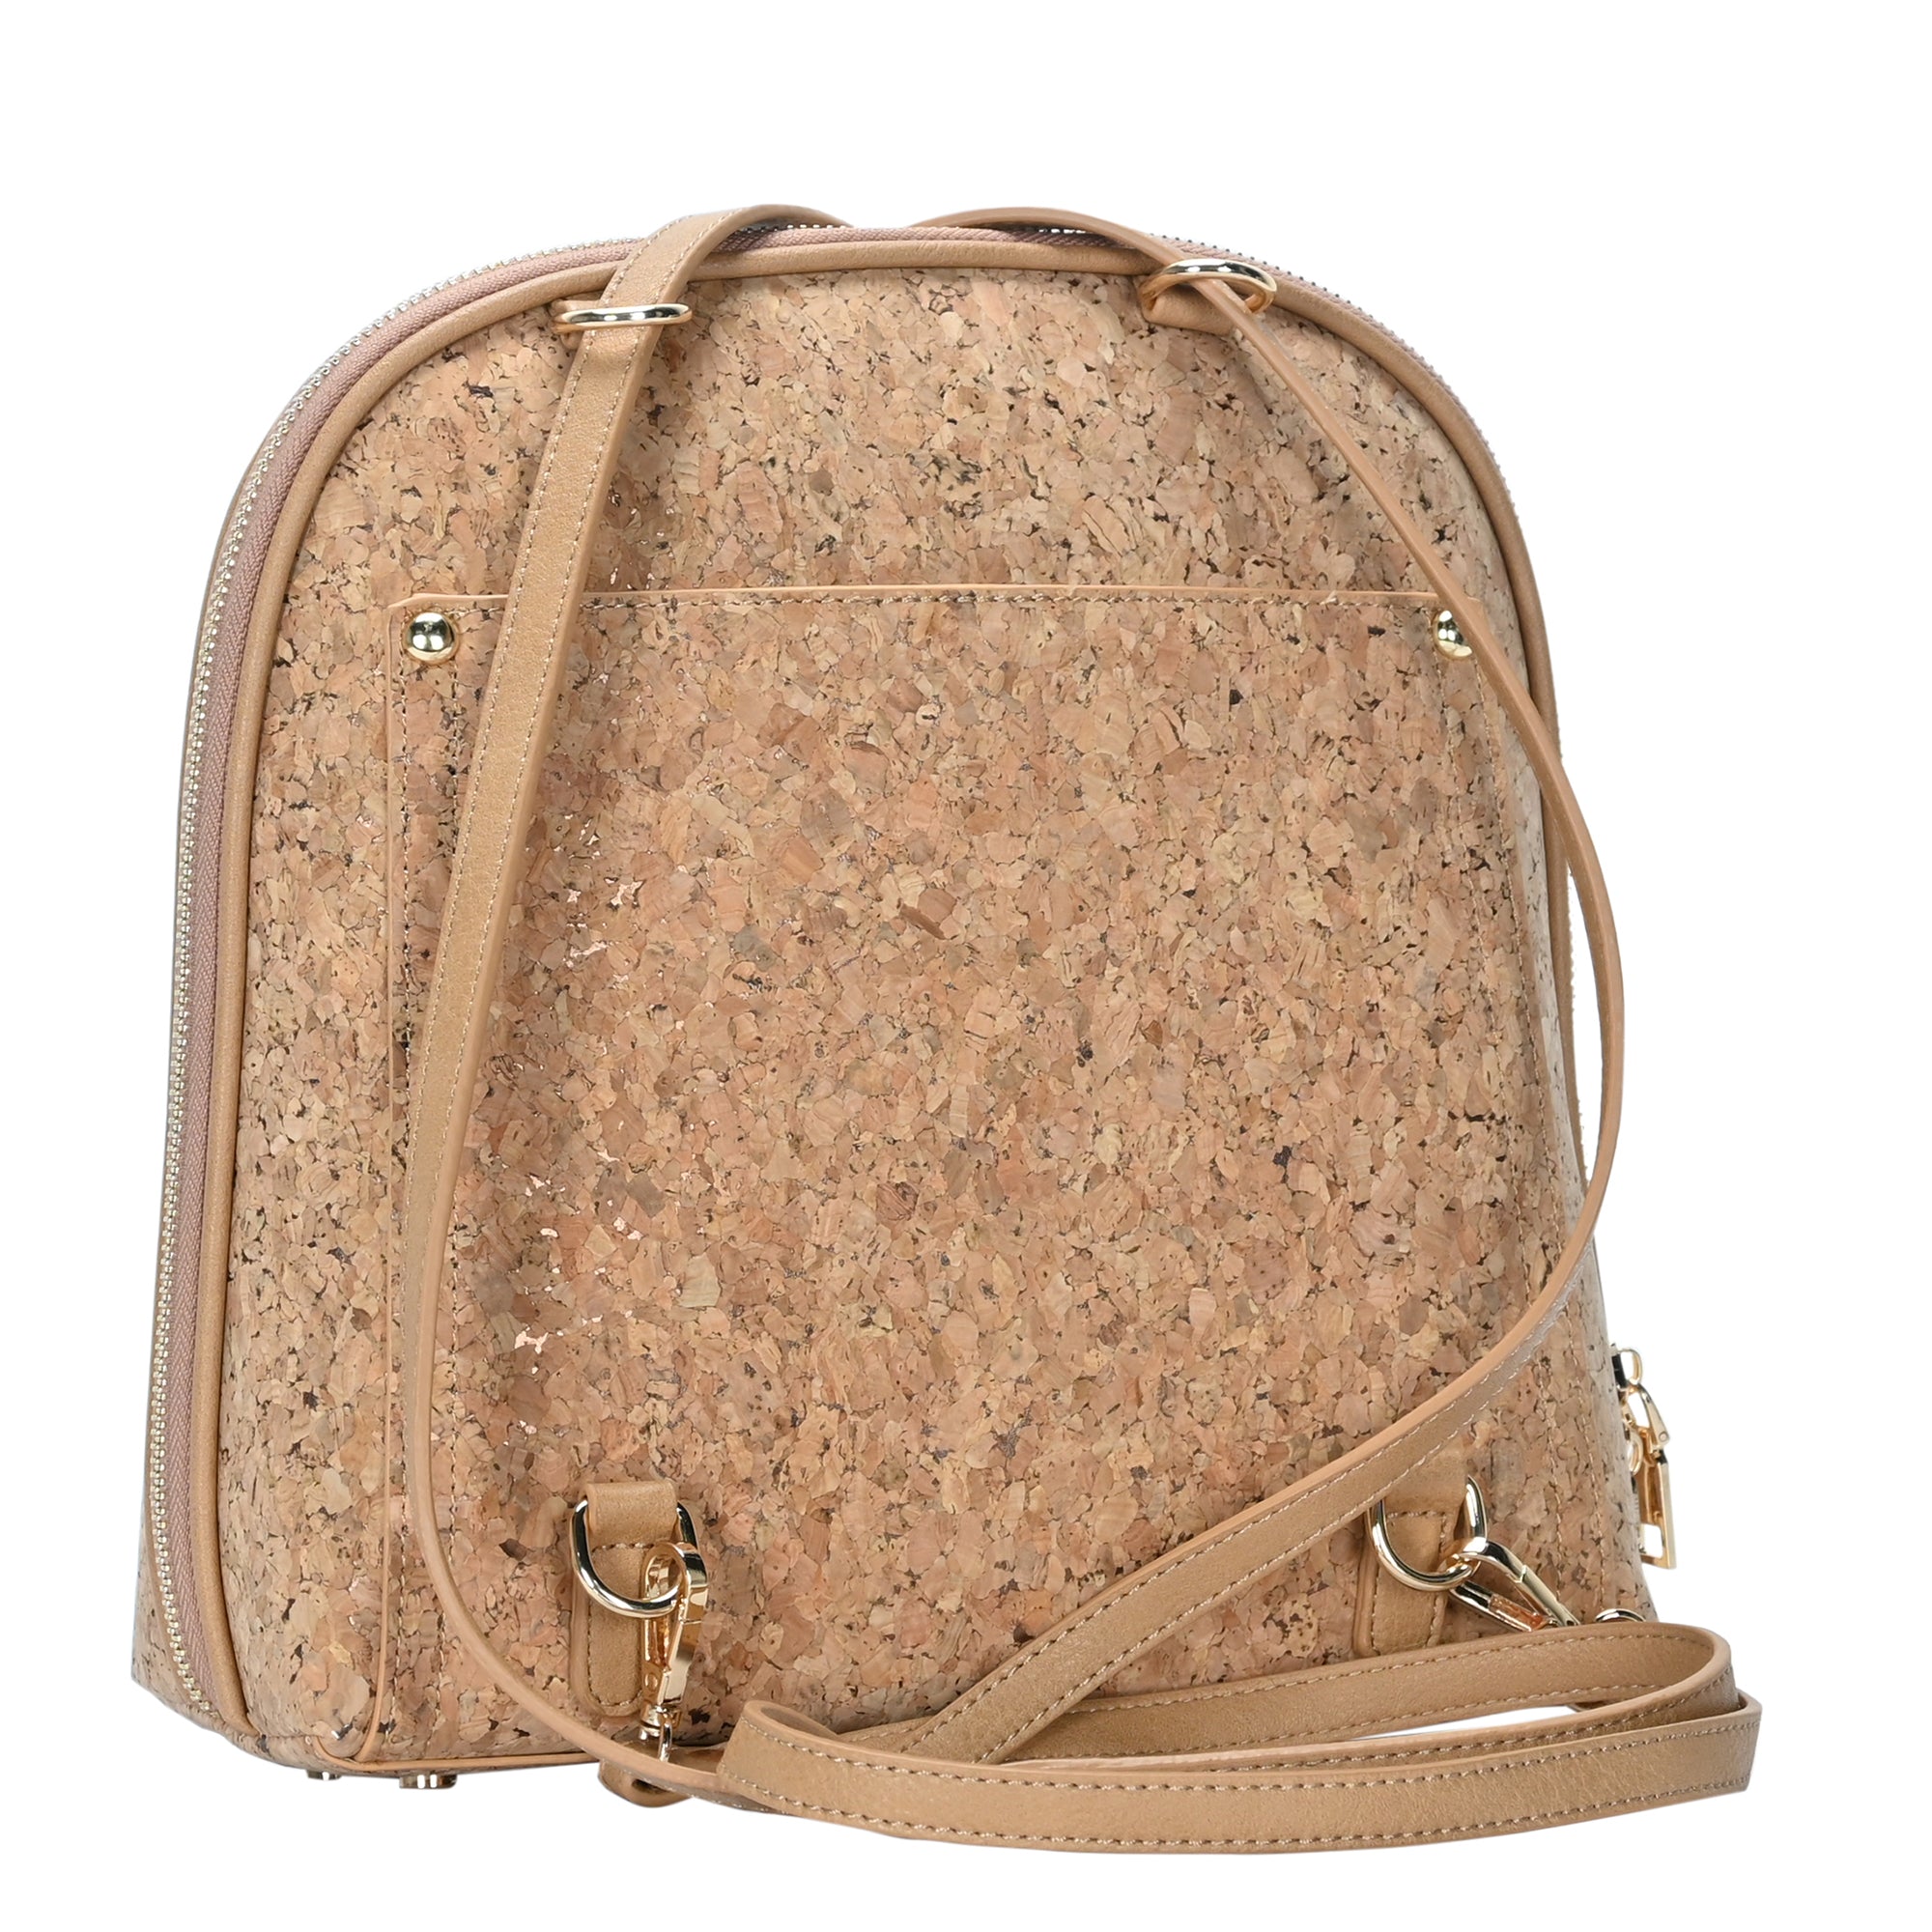 Buy Cork Backpack Online In India - Etsy India